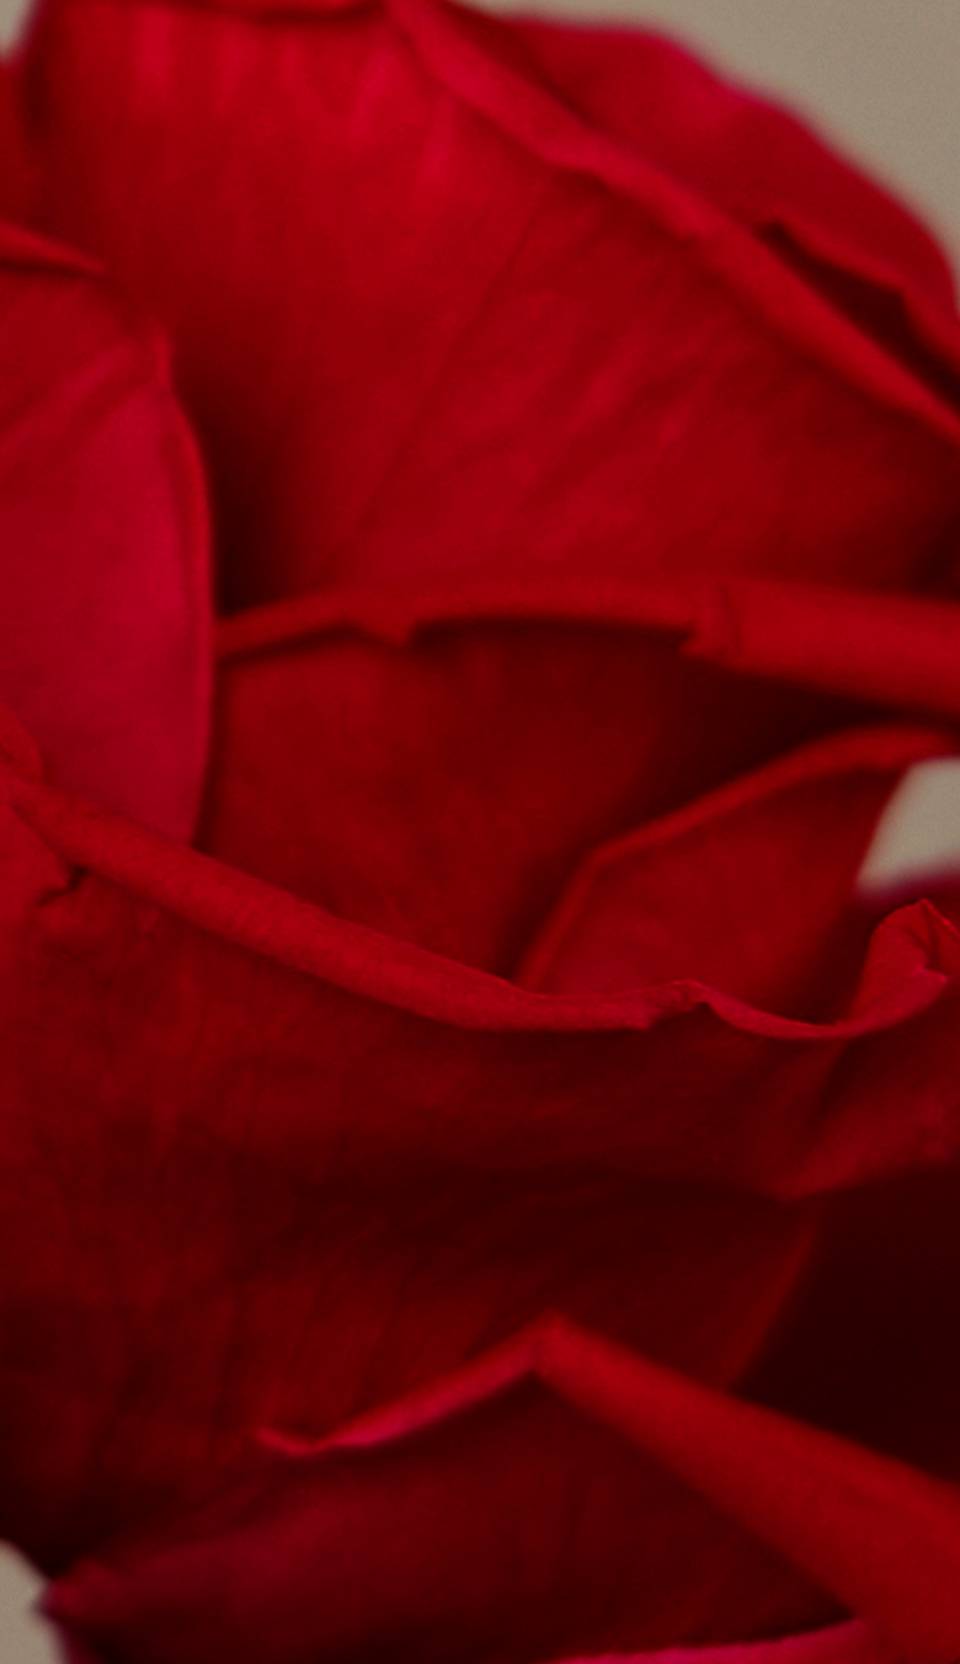 up close image of a red rose